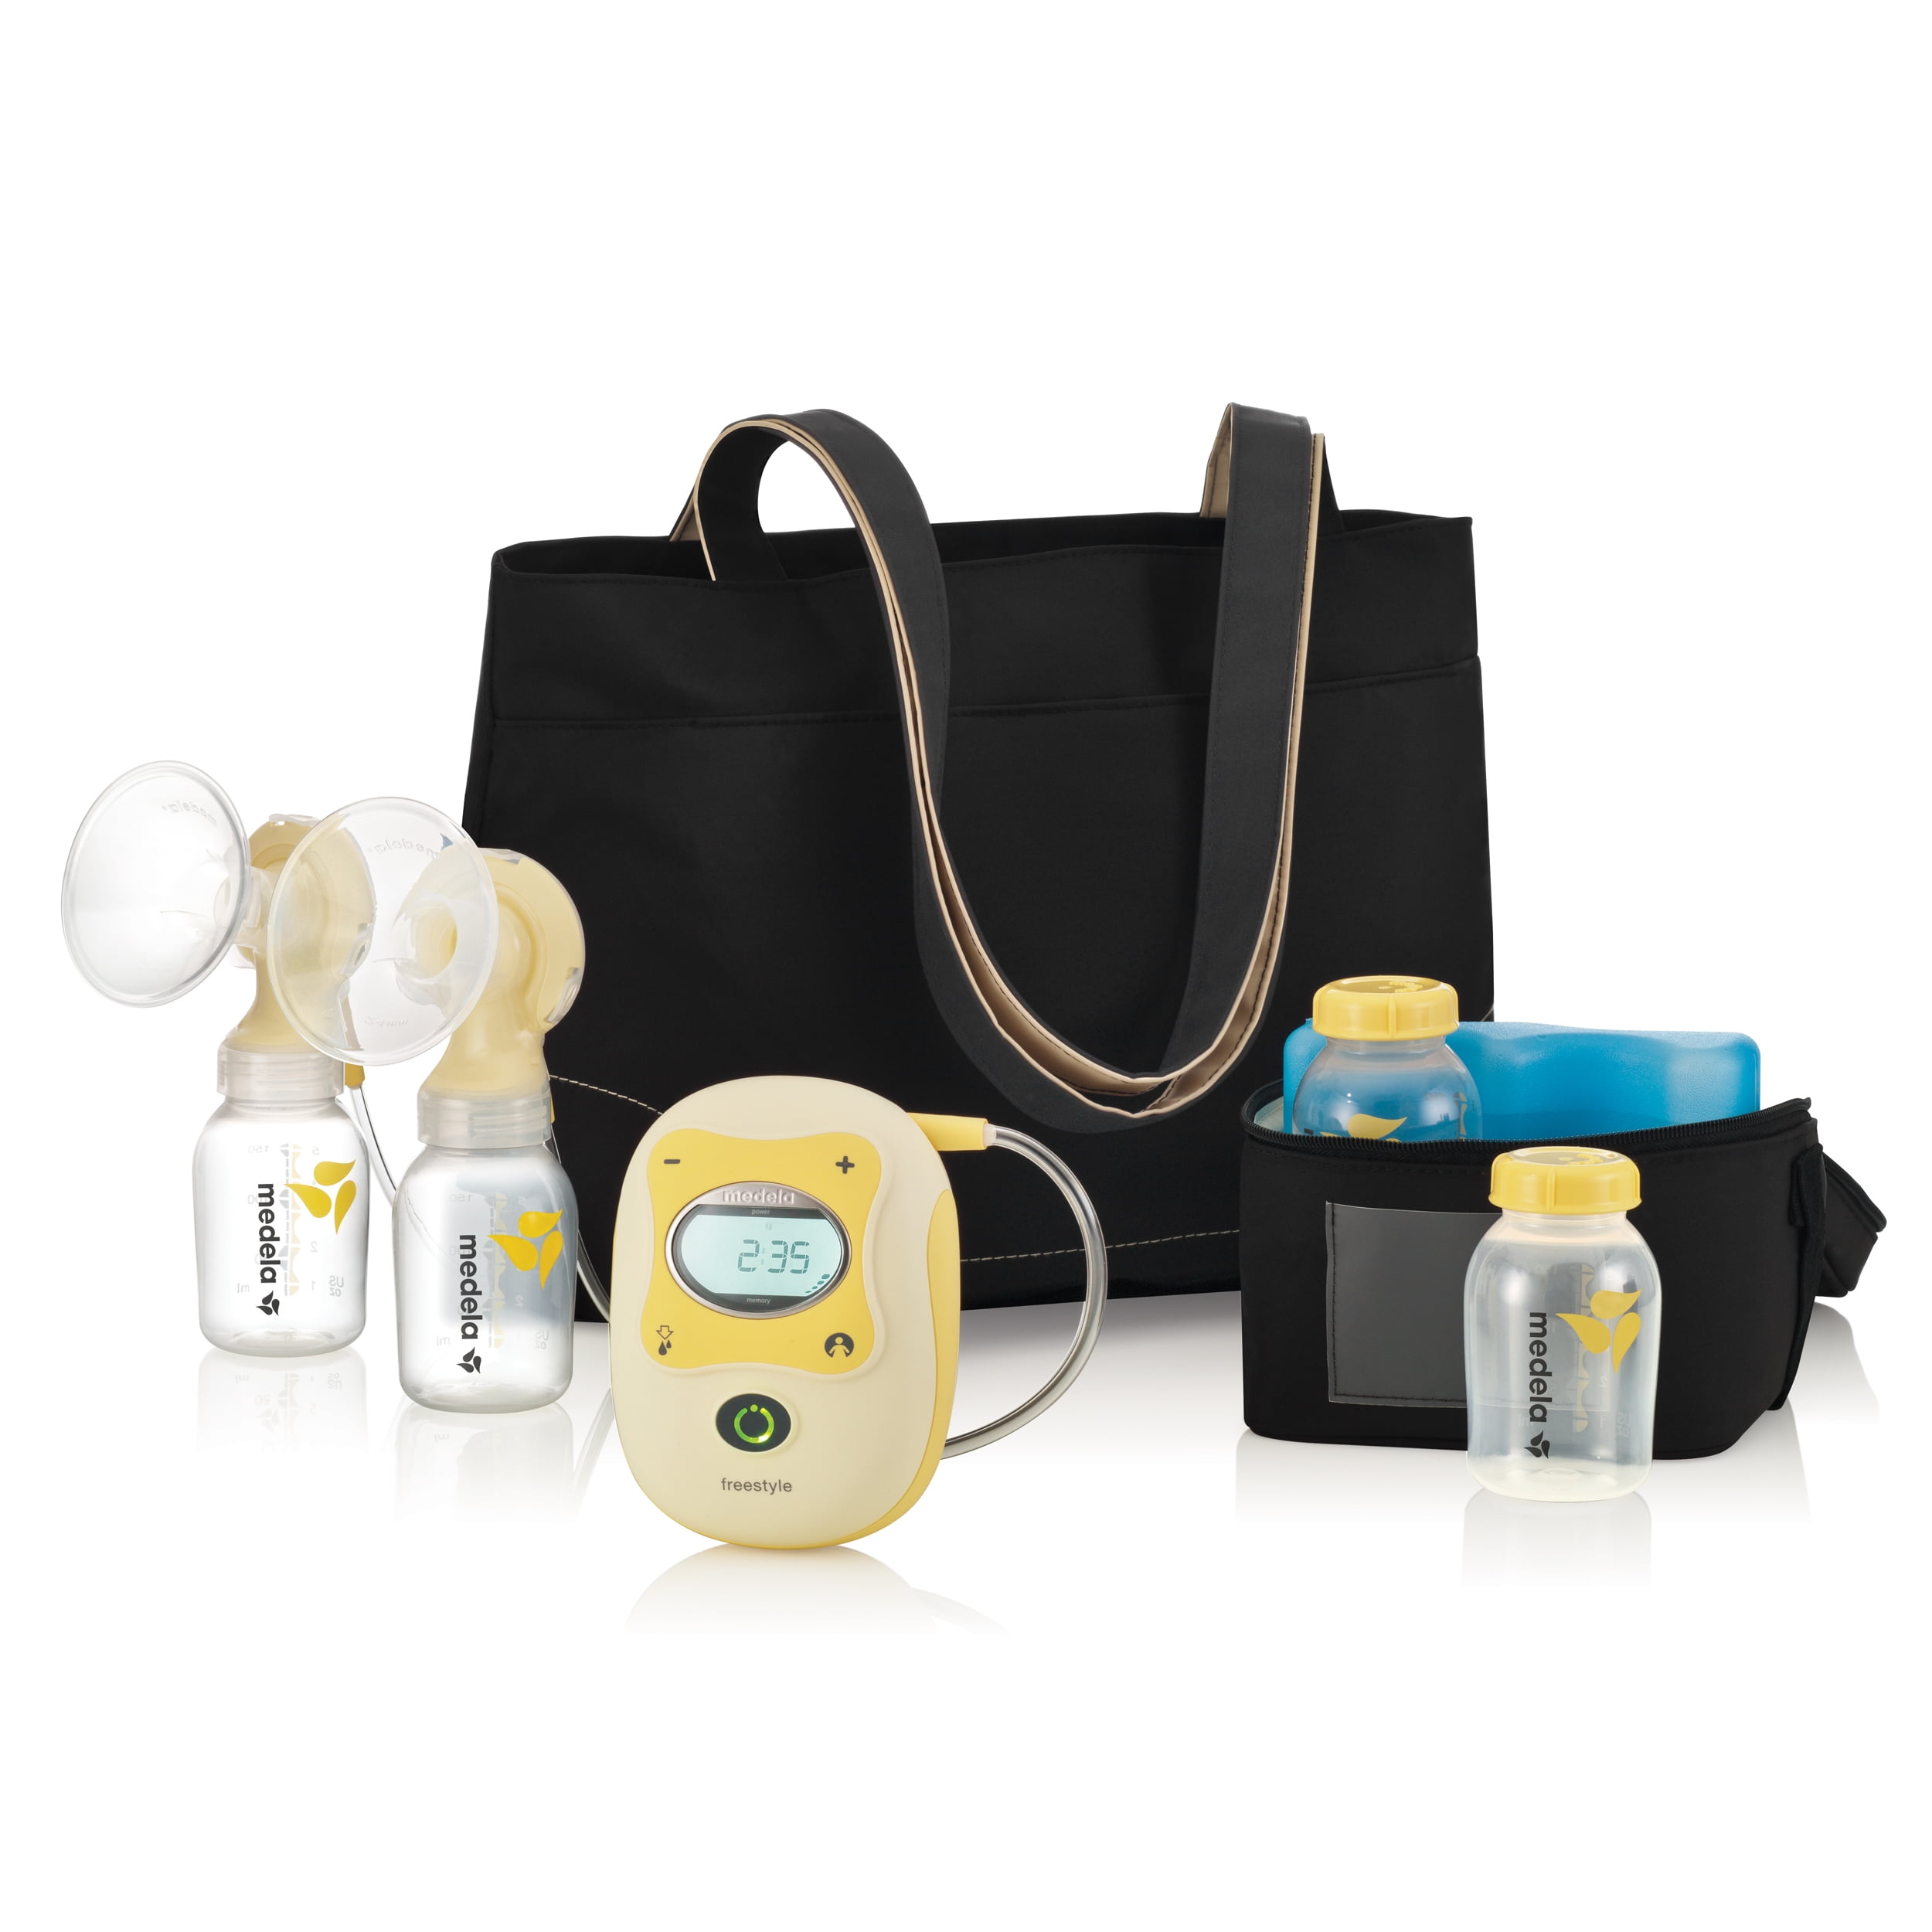 Medela Freestyle Double Electric Breast Pump, Hands Free